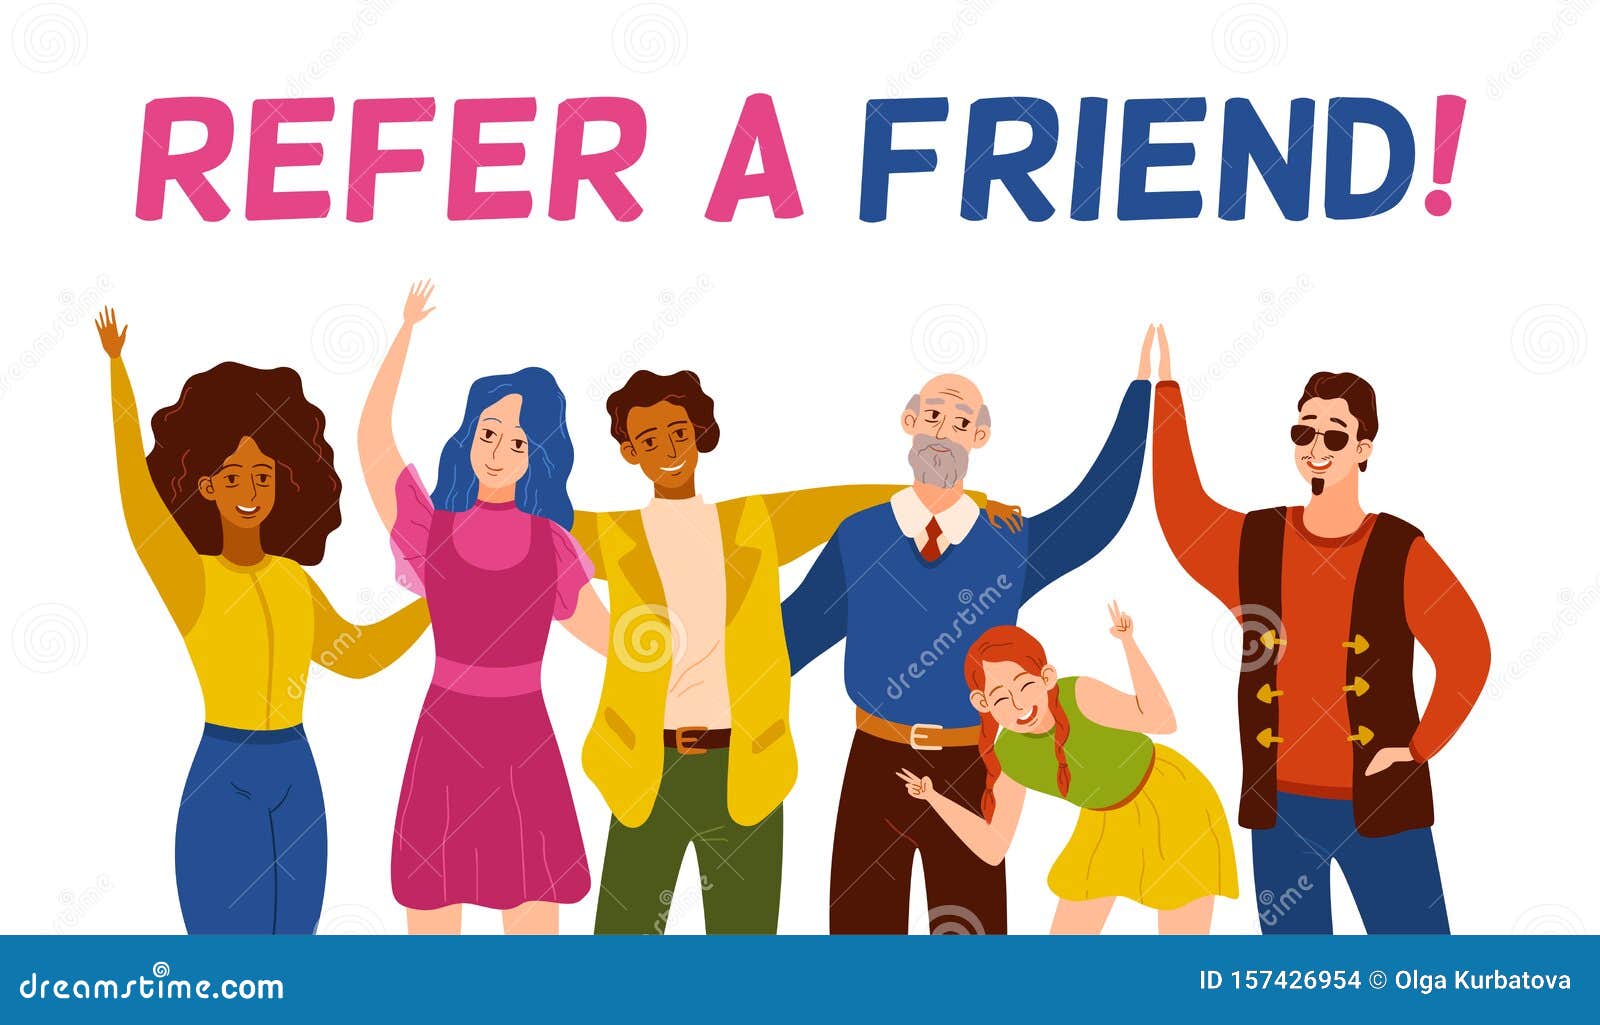 refer a friend. friendly smiling people group referring new user. referral recommendation program, marketing suggestion